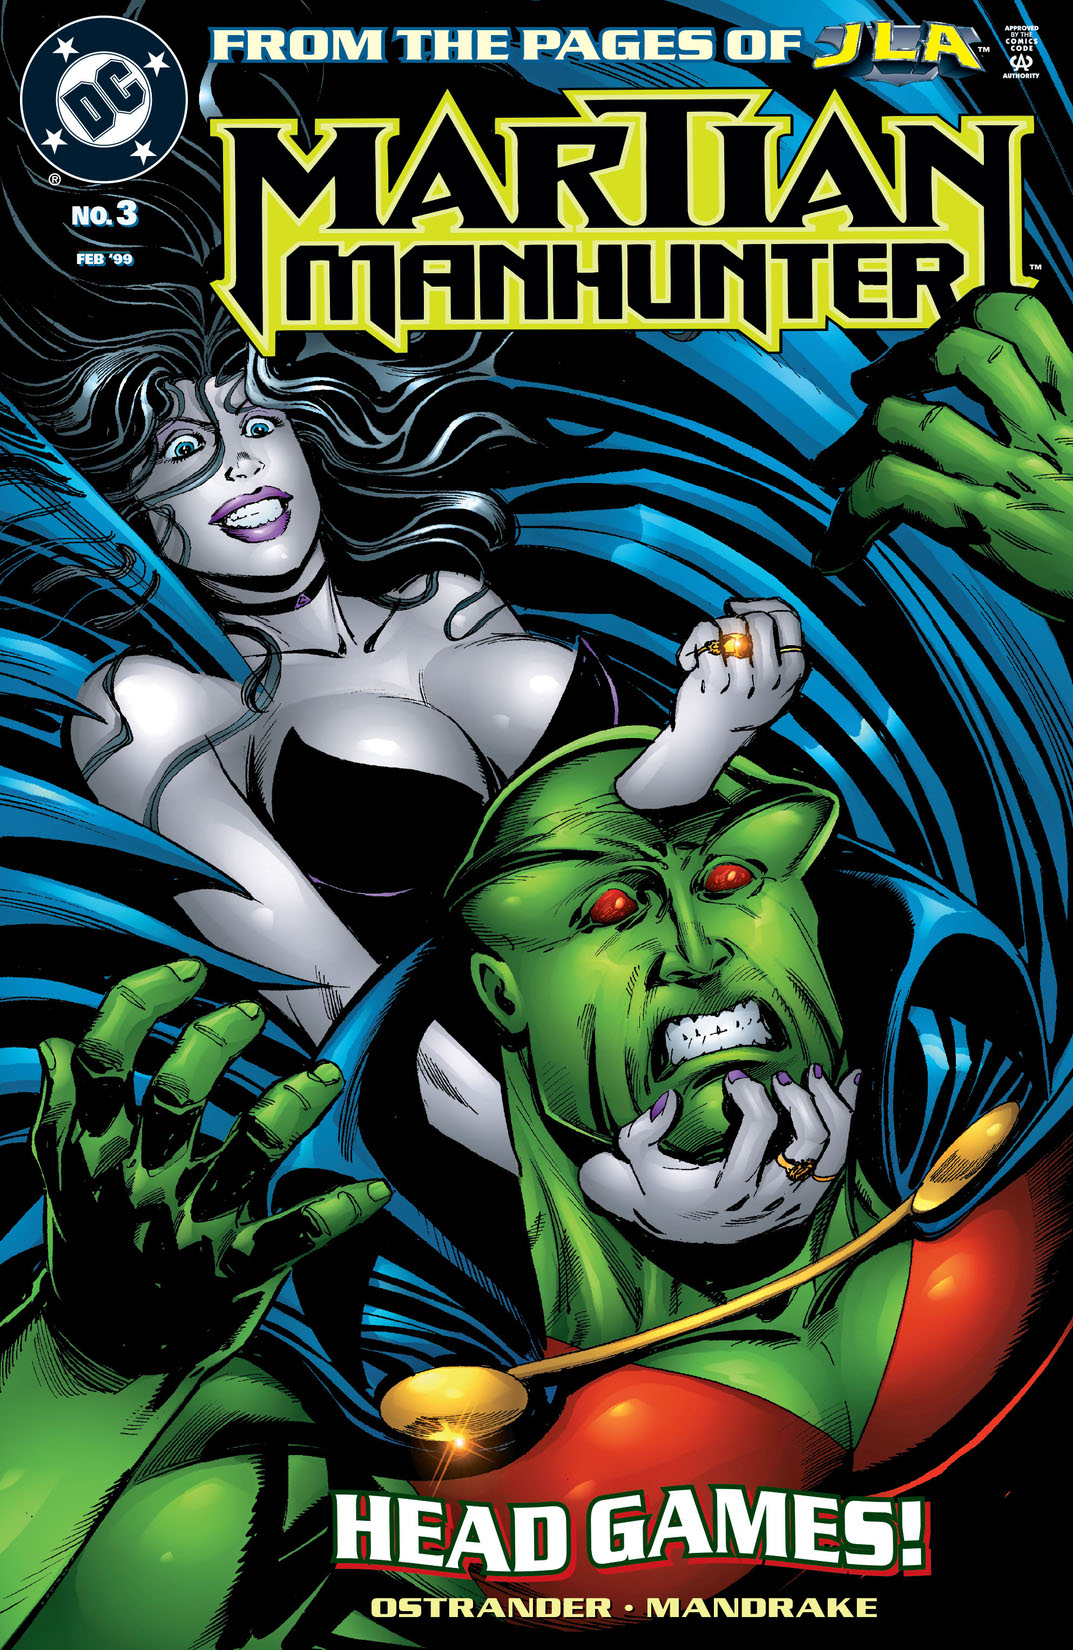 Martian Manhunter (1998-) #3 preview images